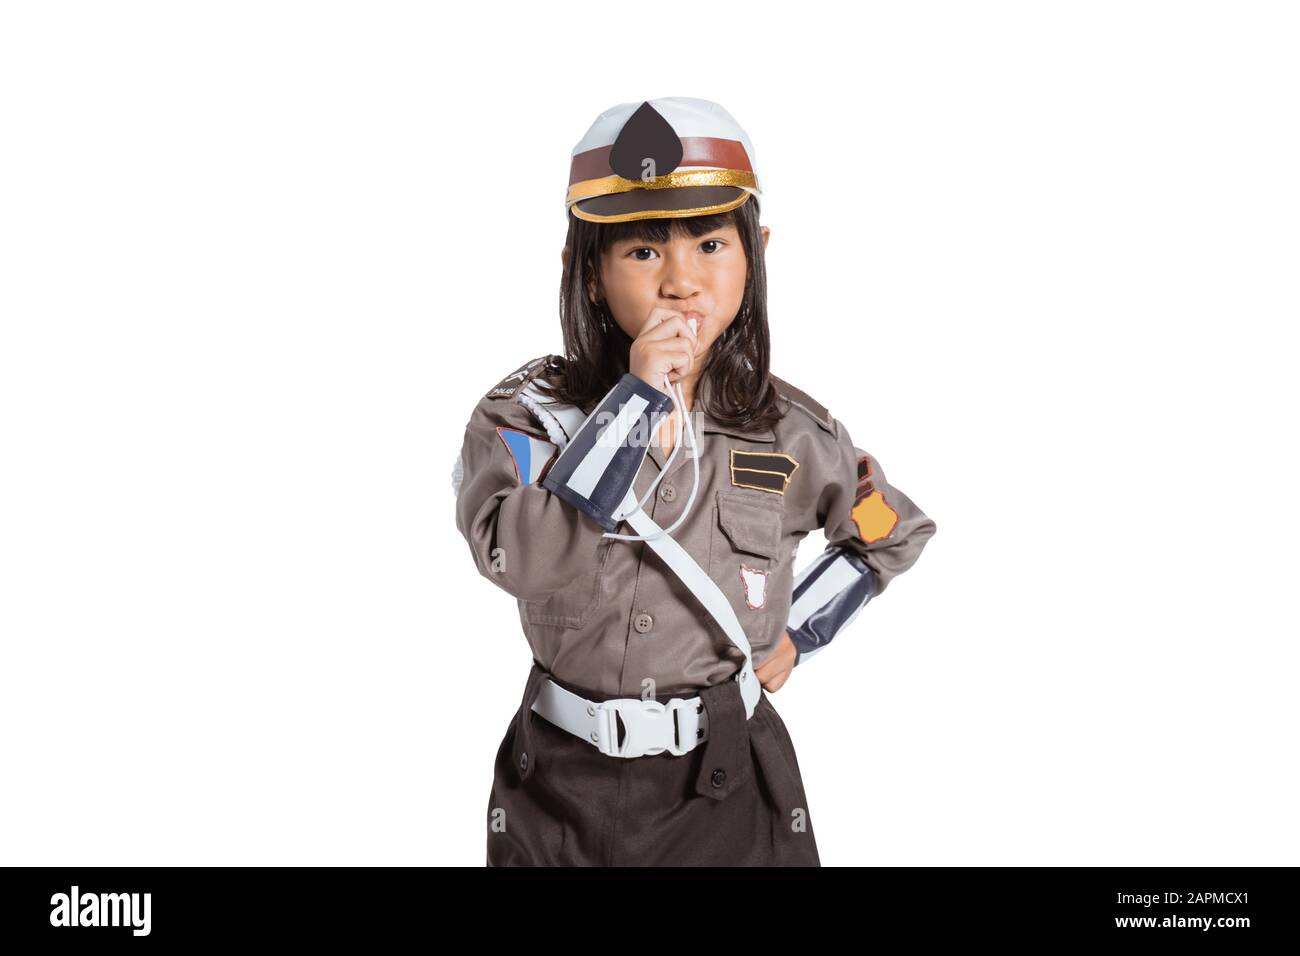 Asian little girl wearing a police uniform with a whistle blowing on an isolated background Stock Photo